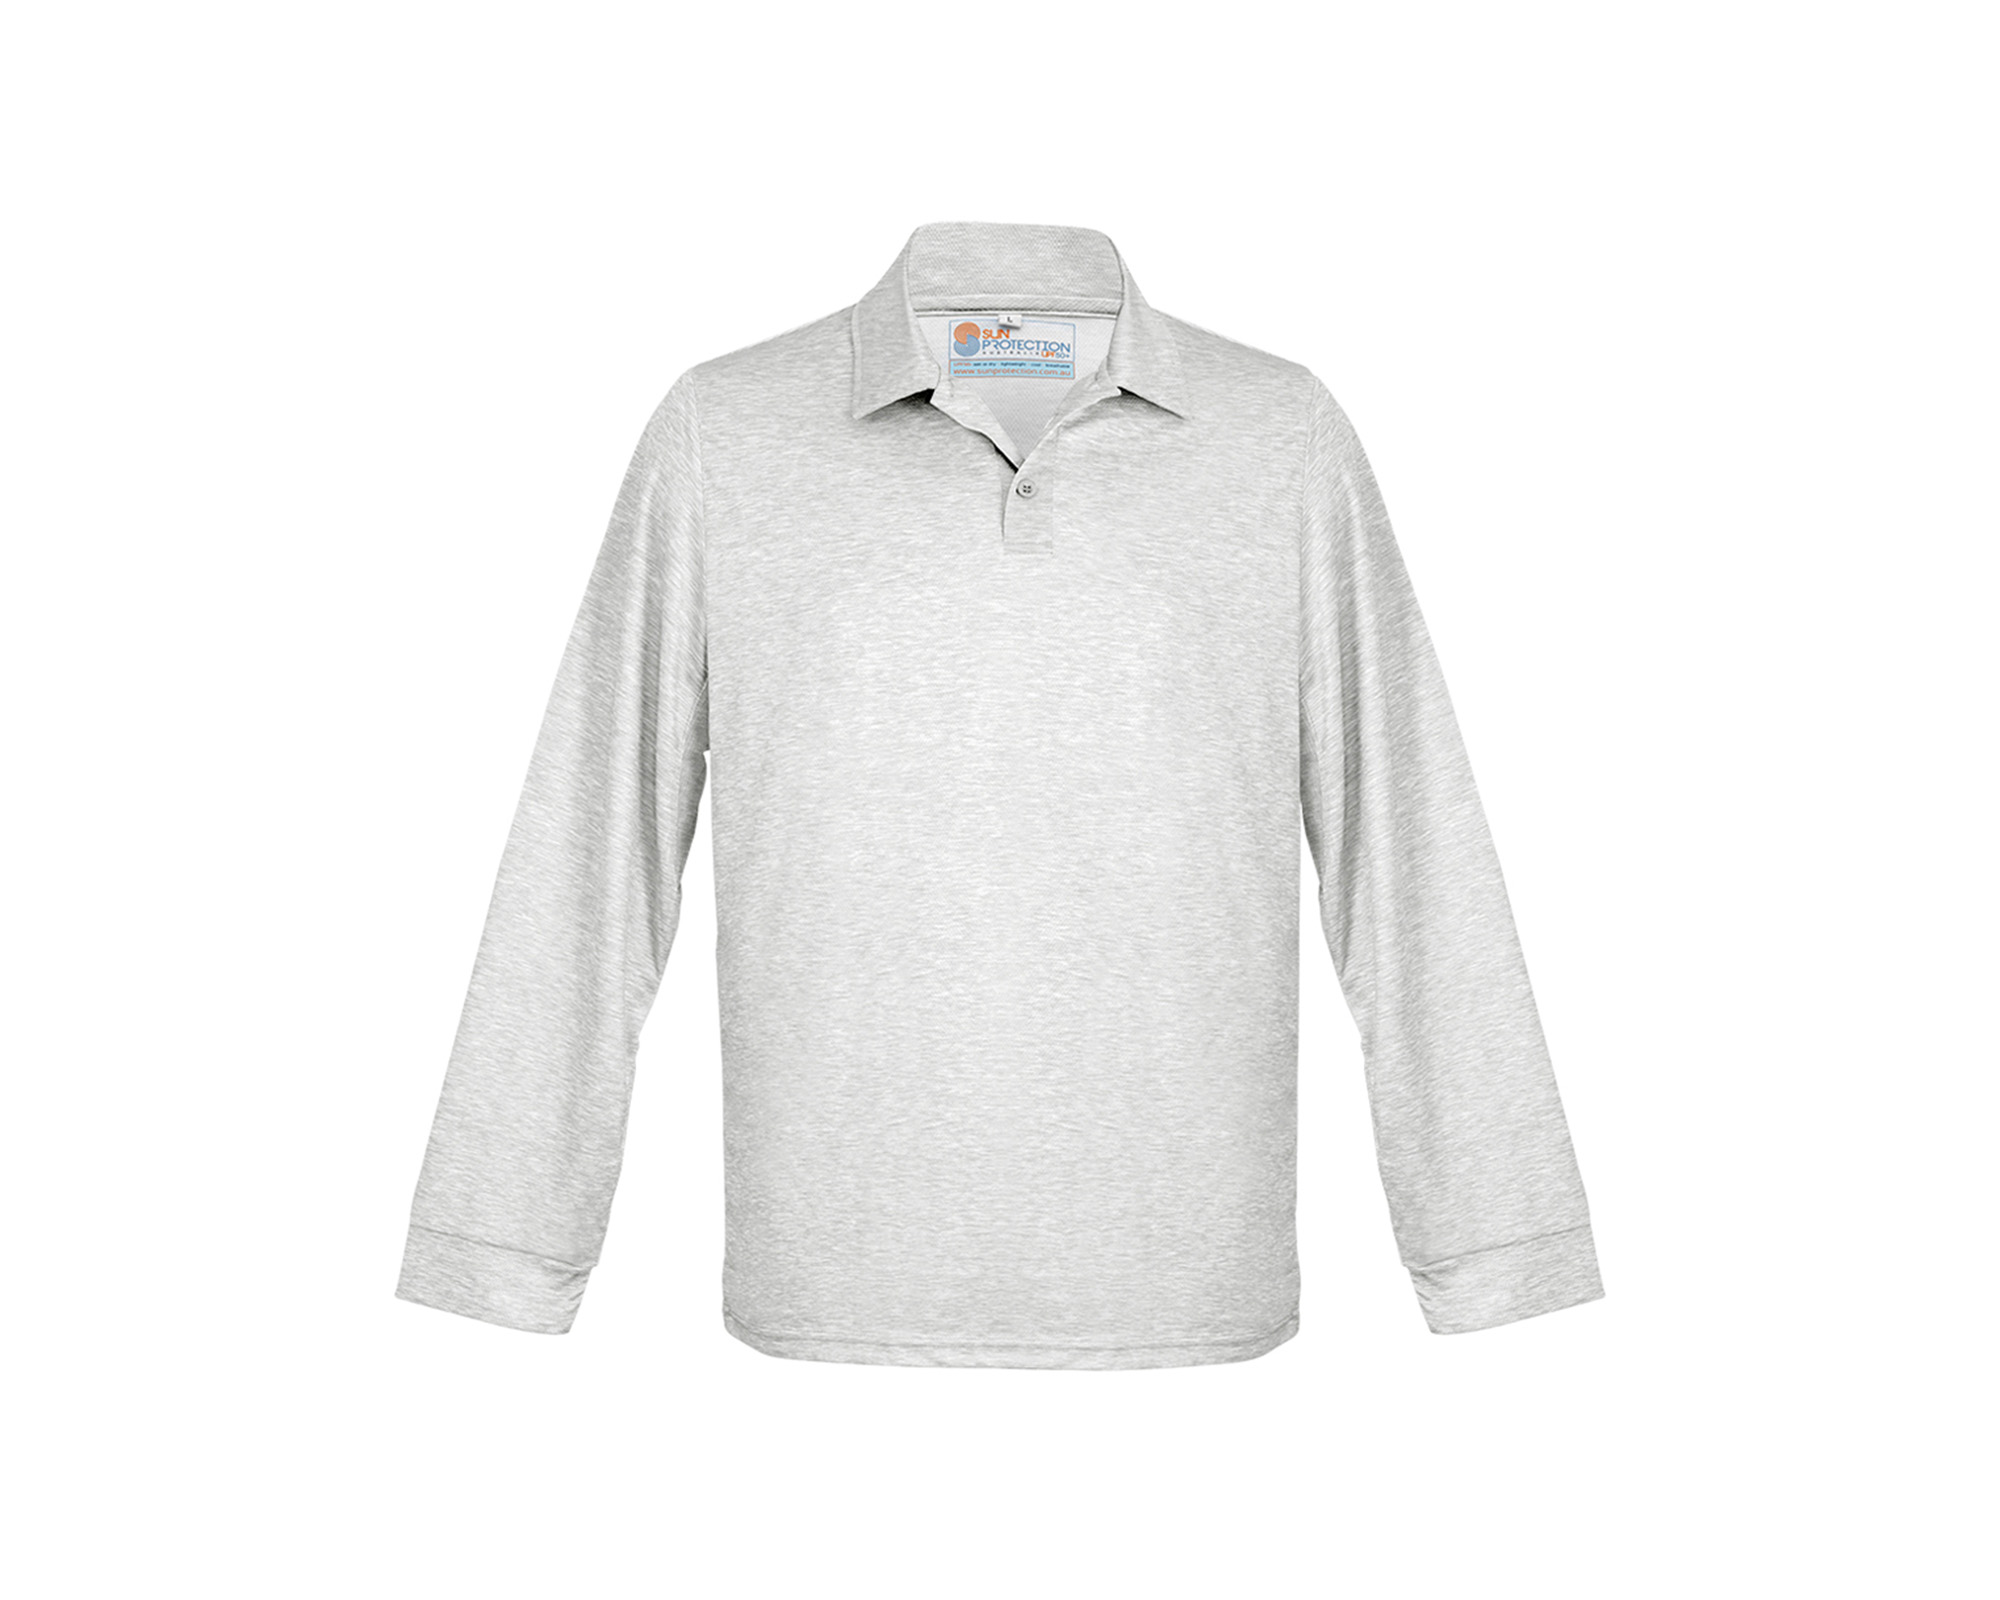 Mens Classic long sleeved Polo UPF 50+ Available in 3 colours, mid grey, silver and blue.  This is Silver